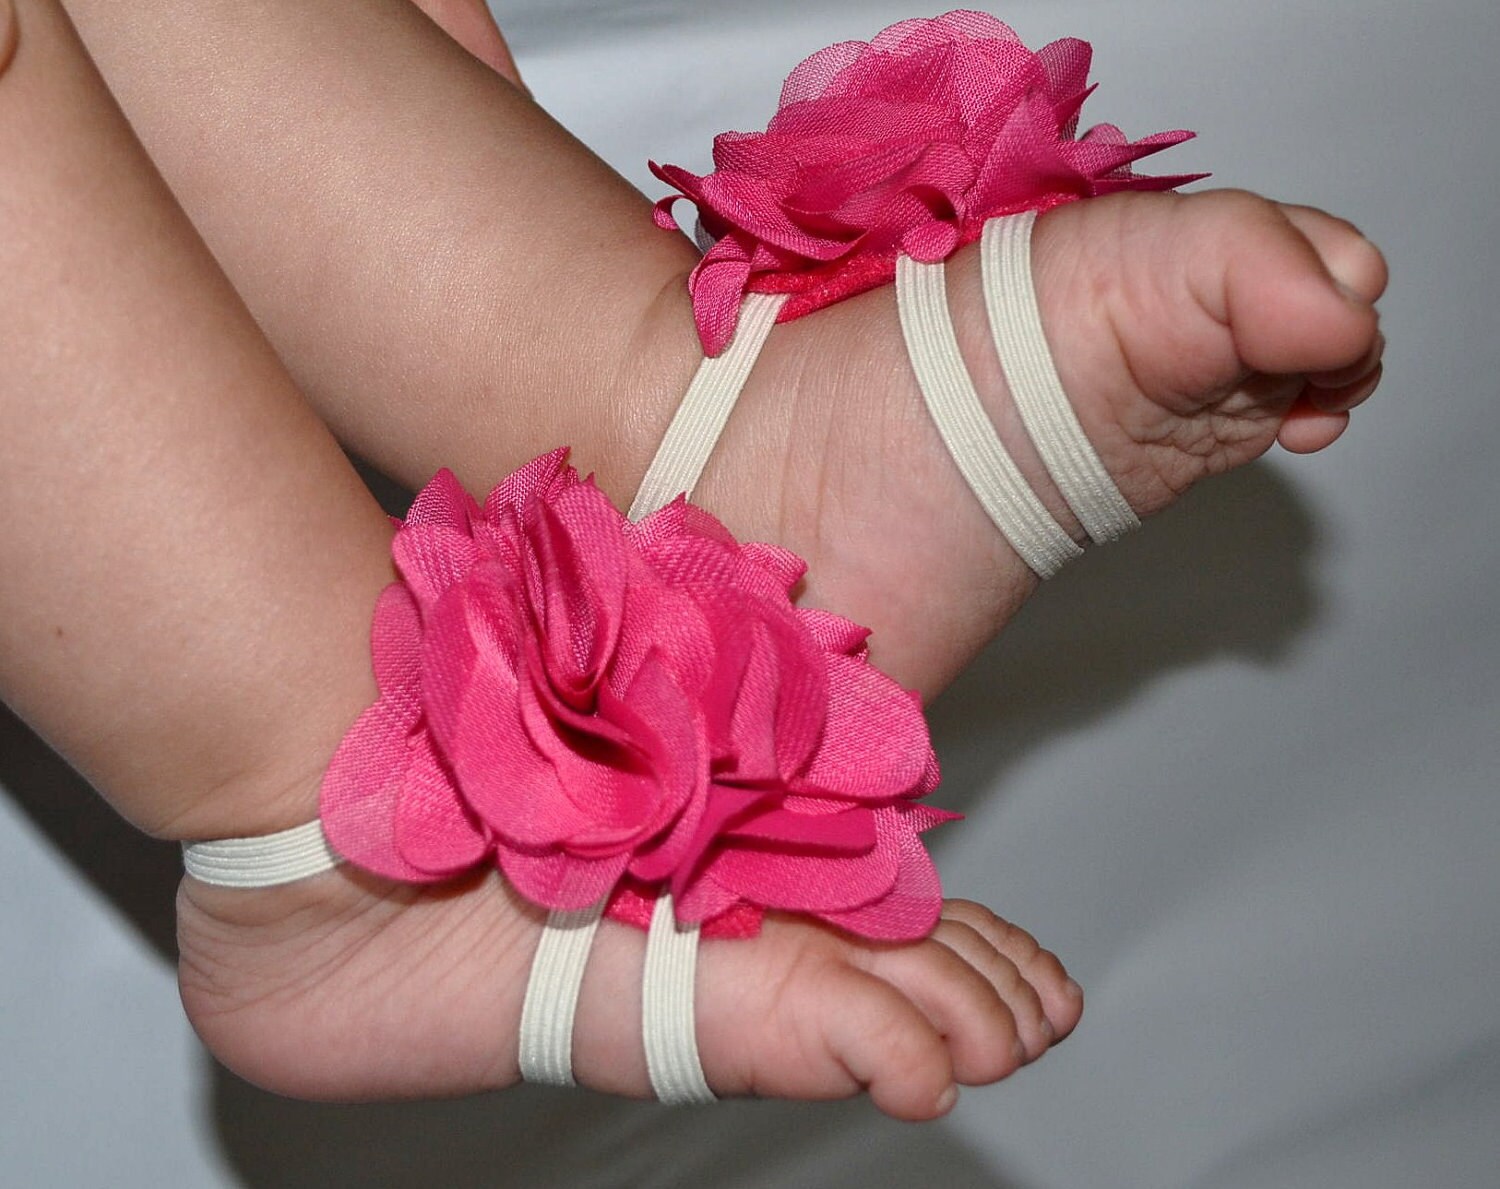 Items similar to Hot pink baby barefoot sandals- baby sandals on Etsy